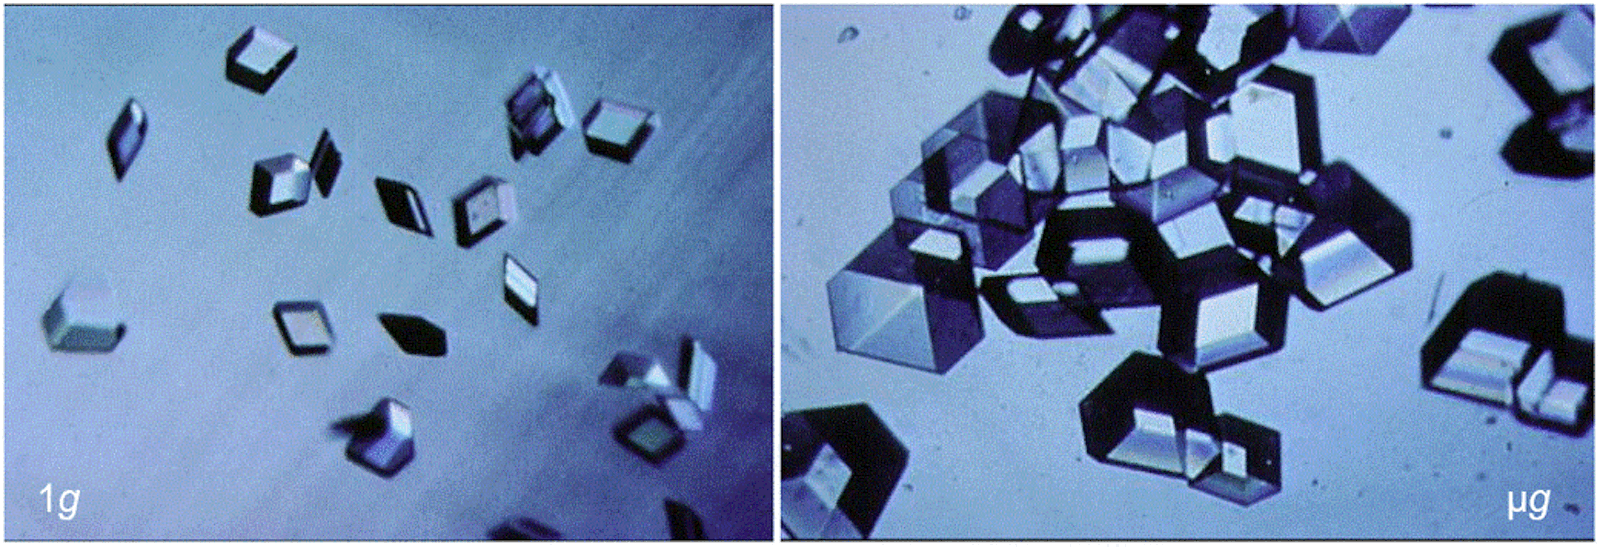 Insulin crystals grown in standard gravity (left) are smaller than those grown in microgravity (right).